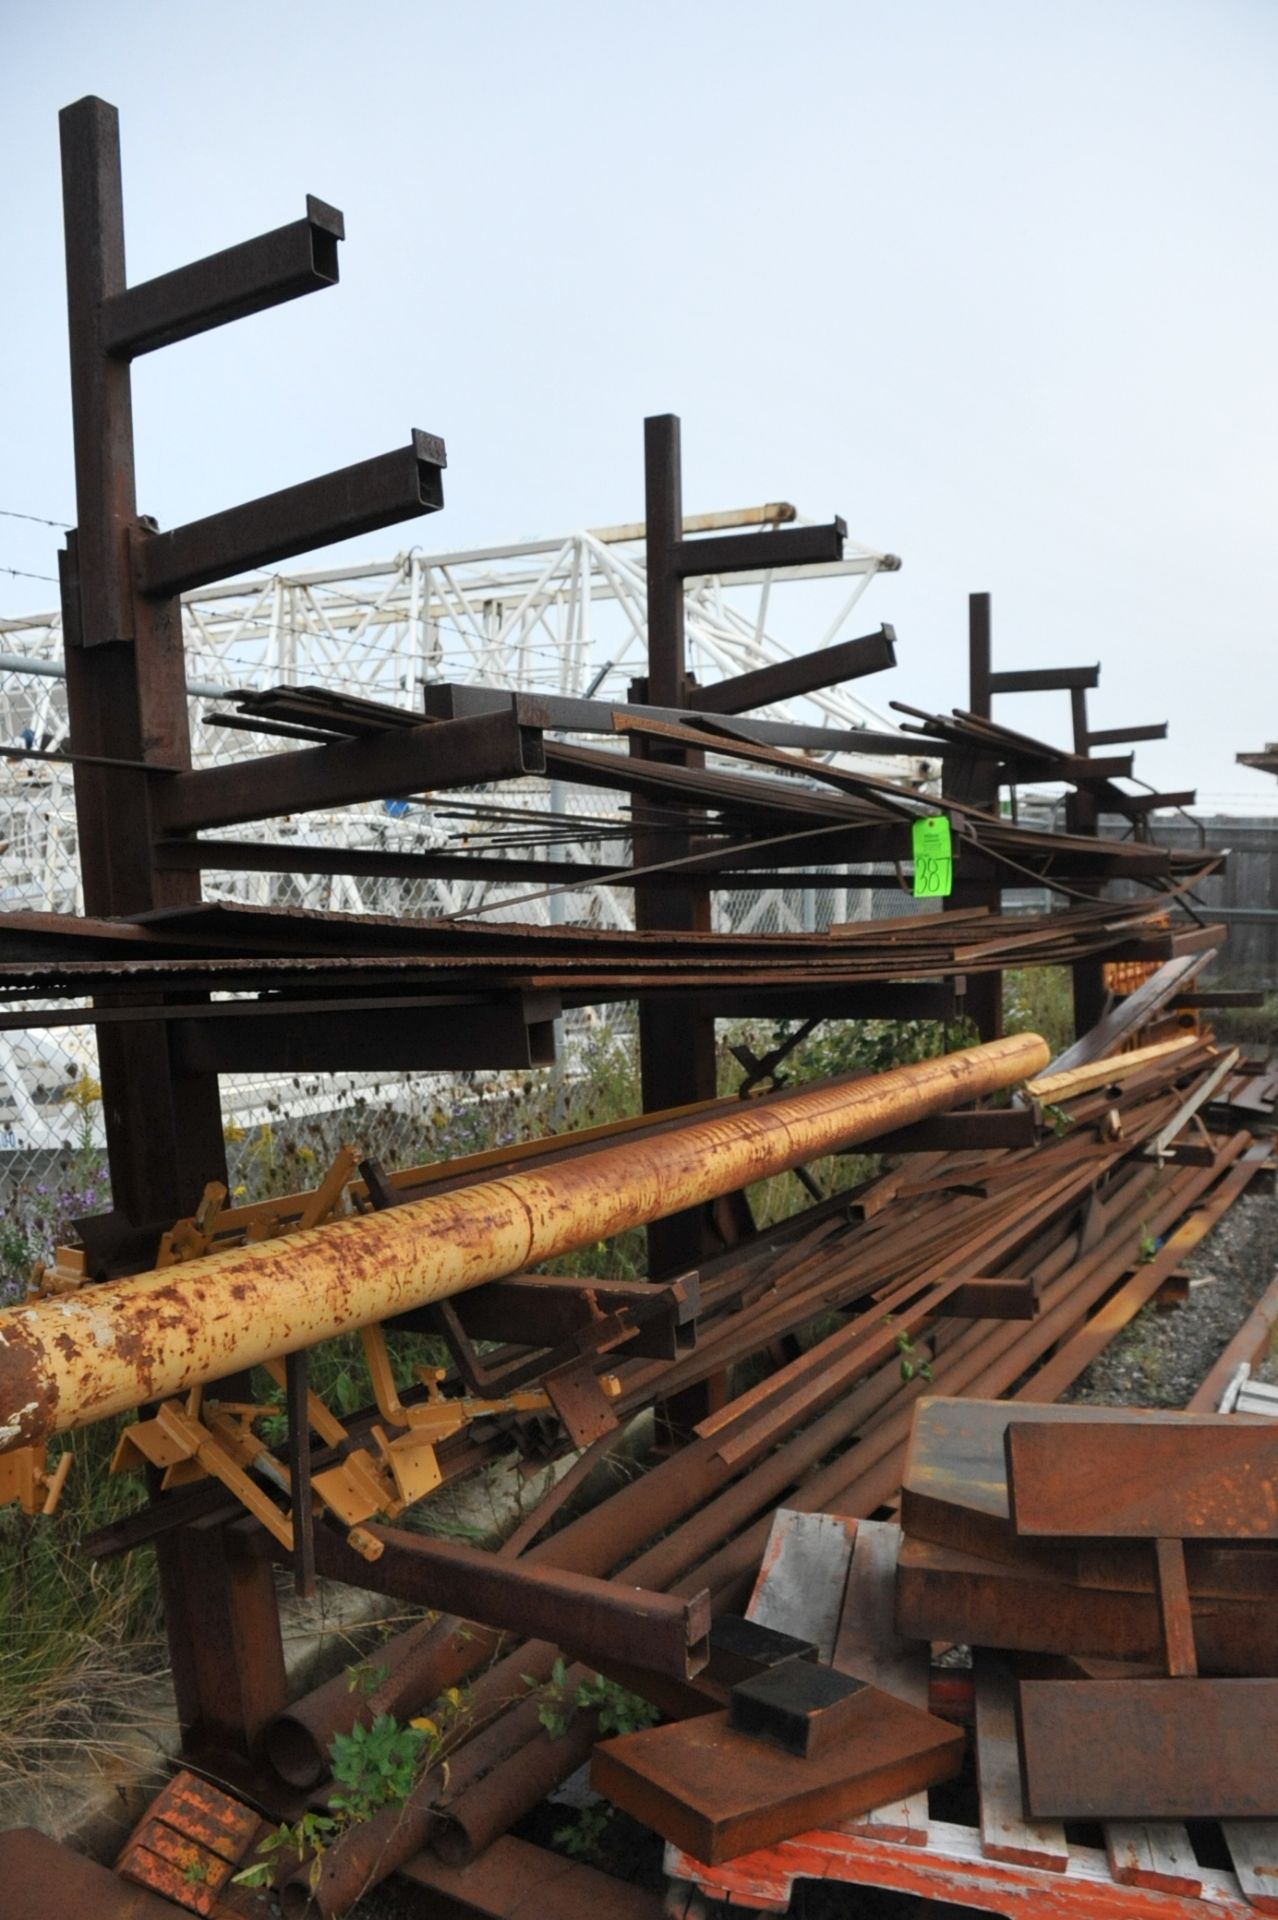 Lot of Asst. Rebar, Angle, Tube & Flat Steel with Stock Rack